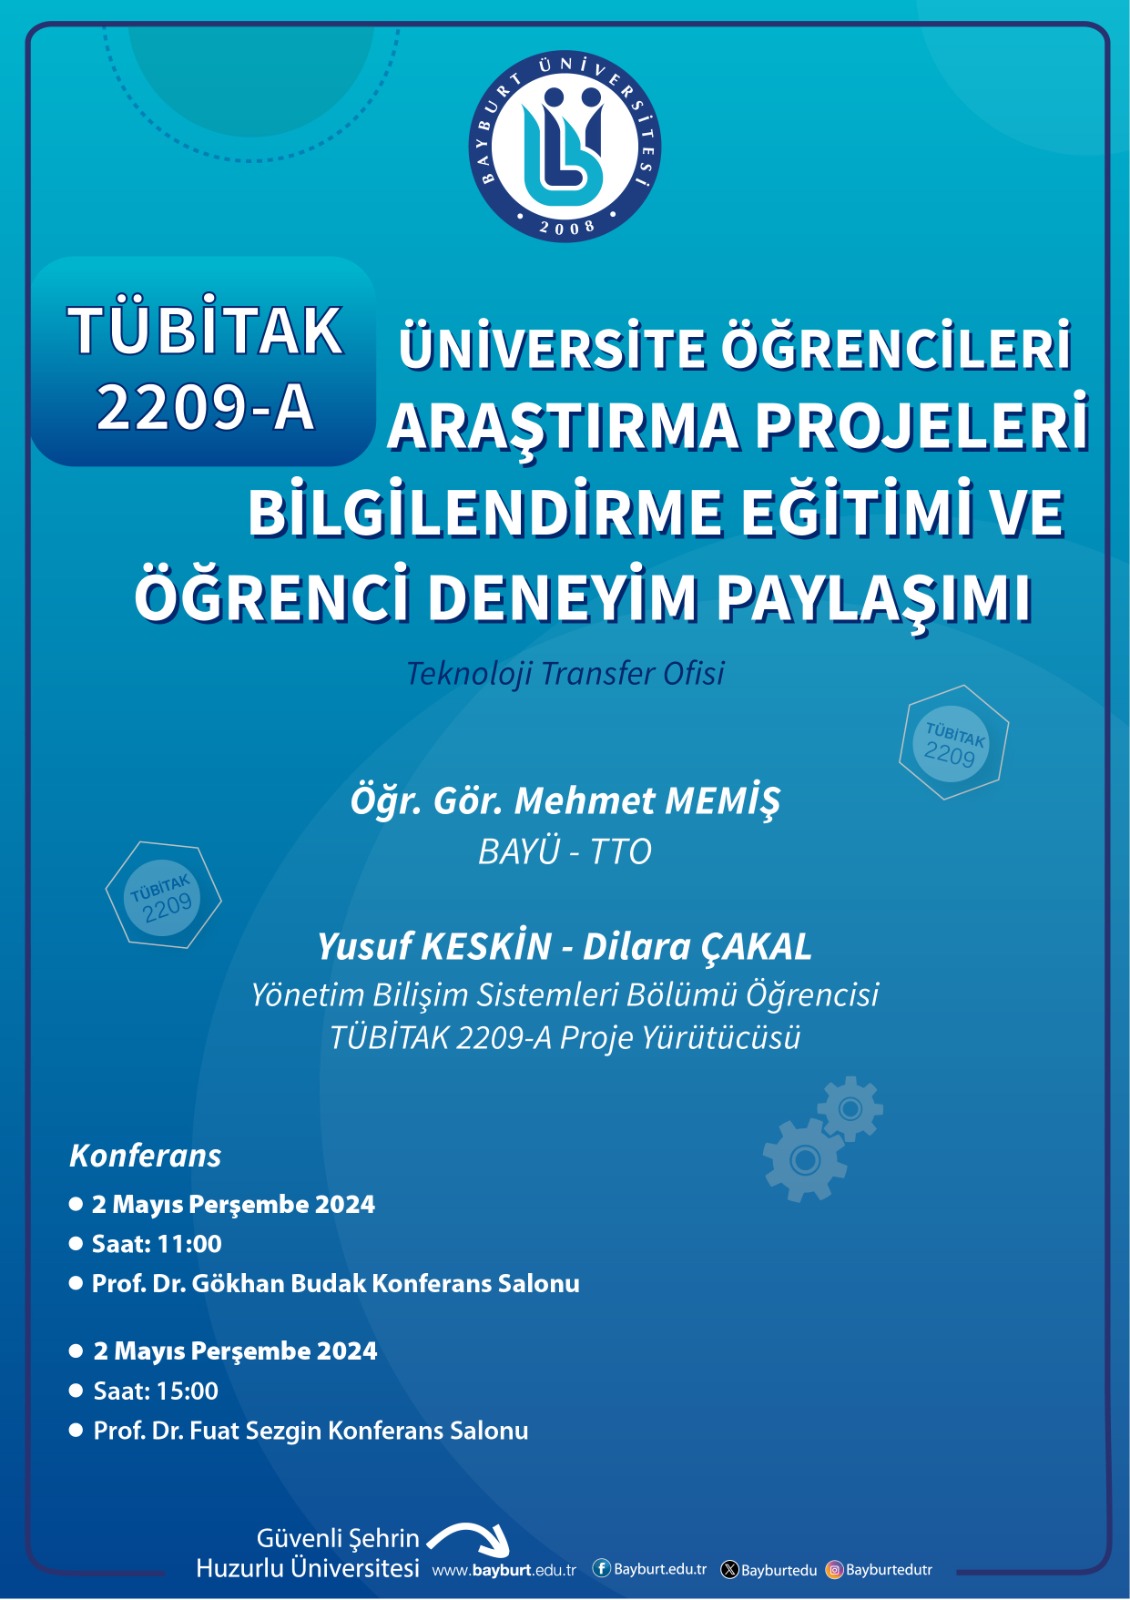 Name of the Event Tübitak 2209-a University Students Research Projects Information Training and Student Experience Sharing